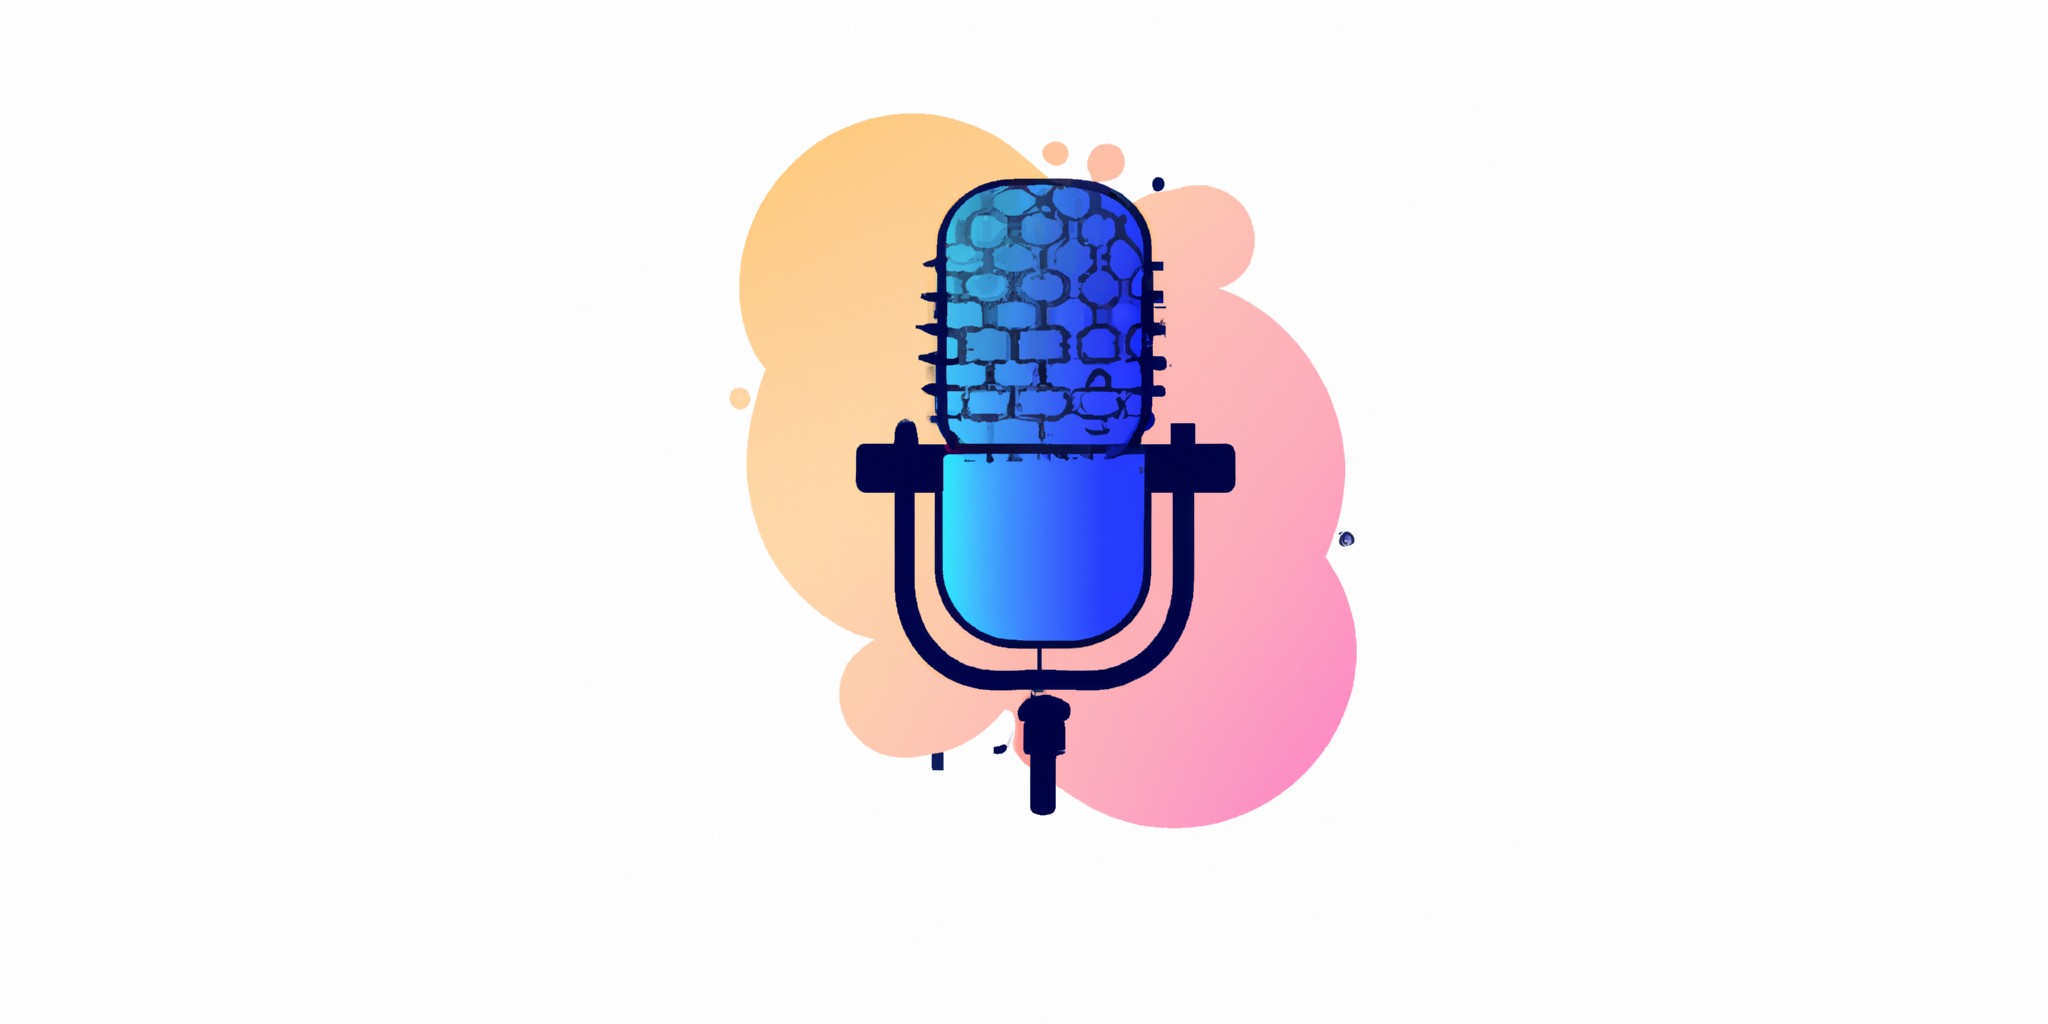 a podcast microphone in flat illustration style with gradients and white background